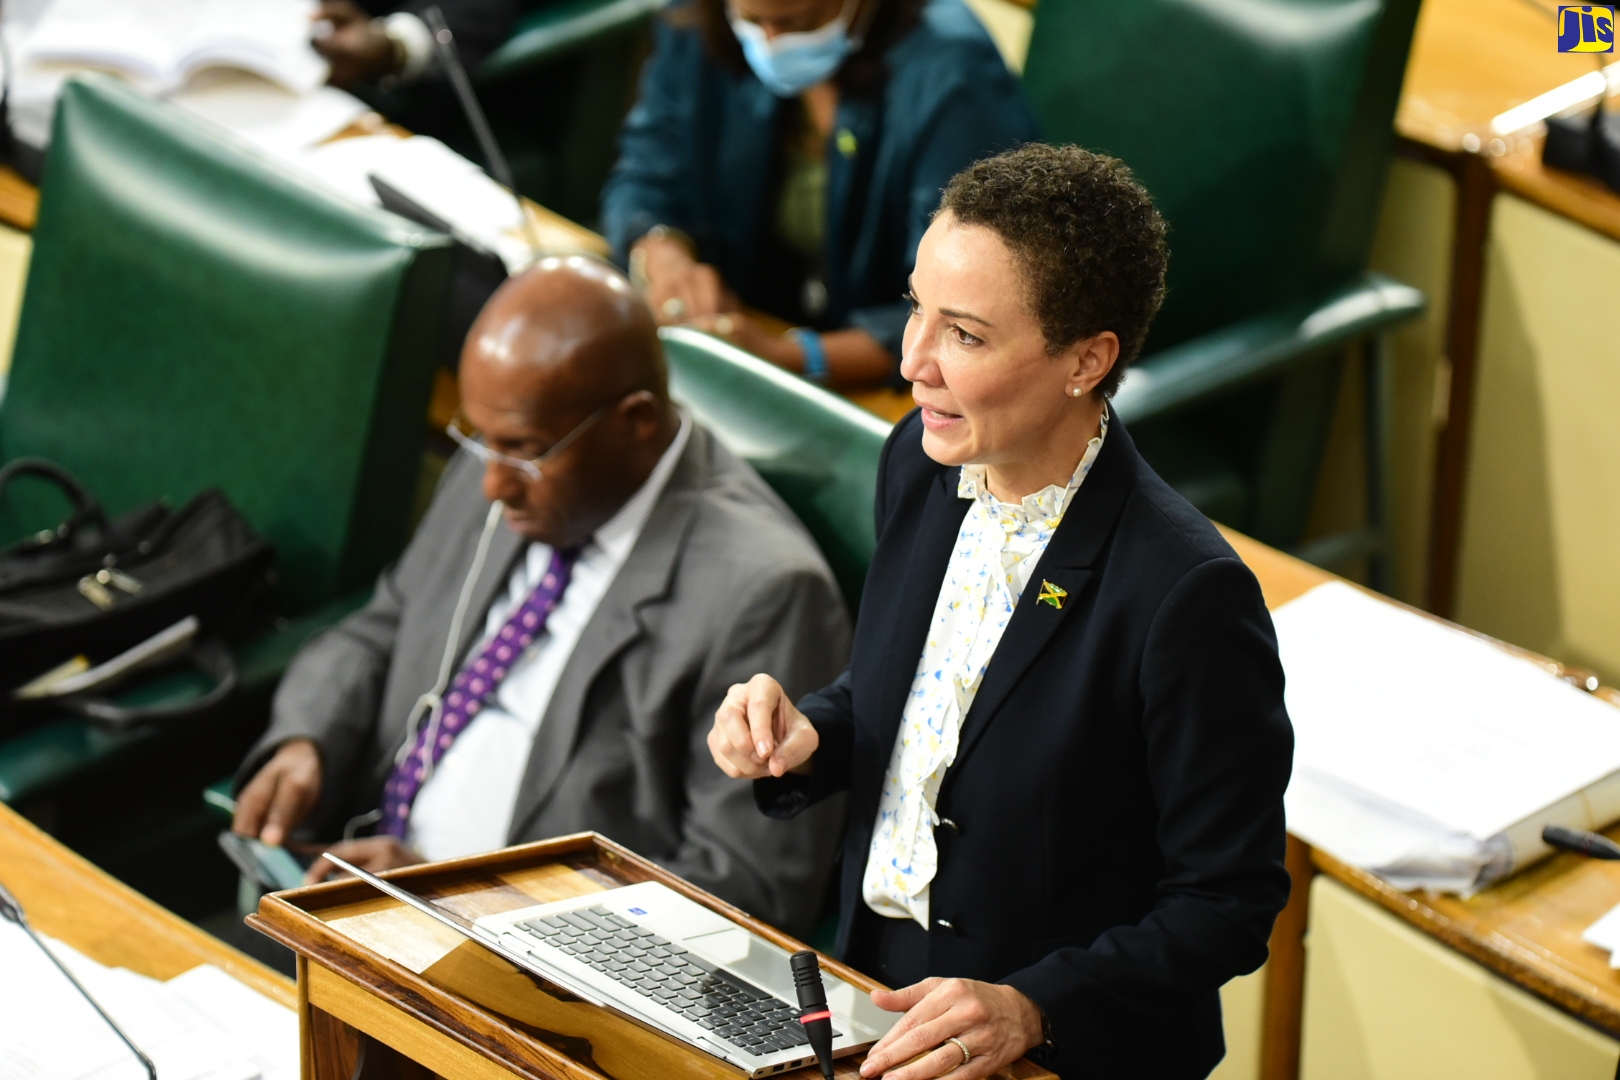 Minister of Foreign Affairs and Foreign Trade and Leader of Government Business in the Upper House, Senator the Hon. Kamina Johnson Smith, clarifies a matter while addressing the Senate during its sitting on Friday (July 22). Beside her is Minister of Industry, Investment and Commerce, Senator the Hon. Aubyn Hill.